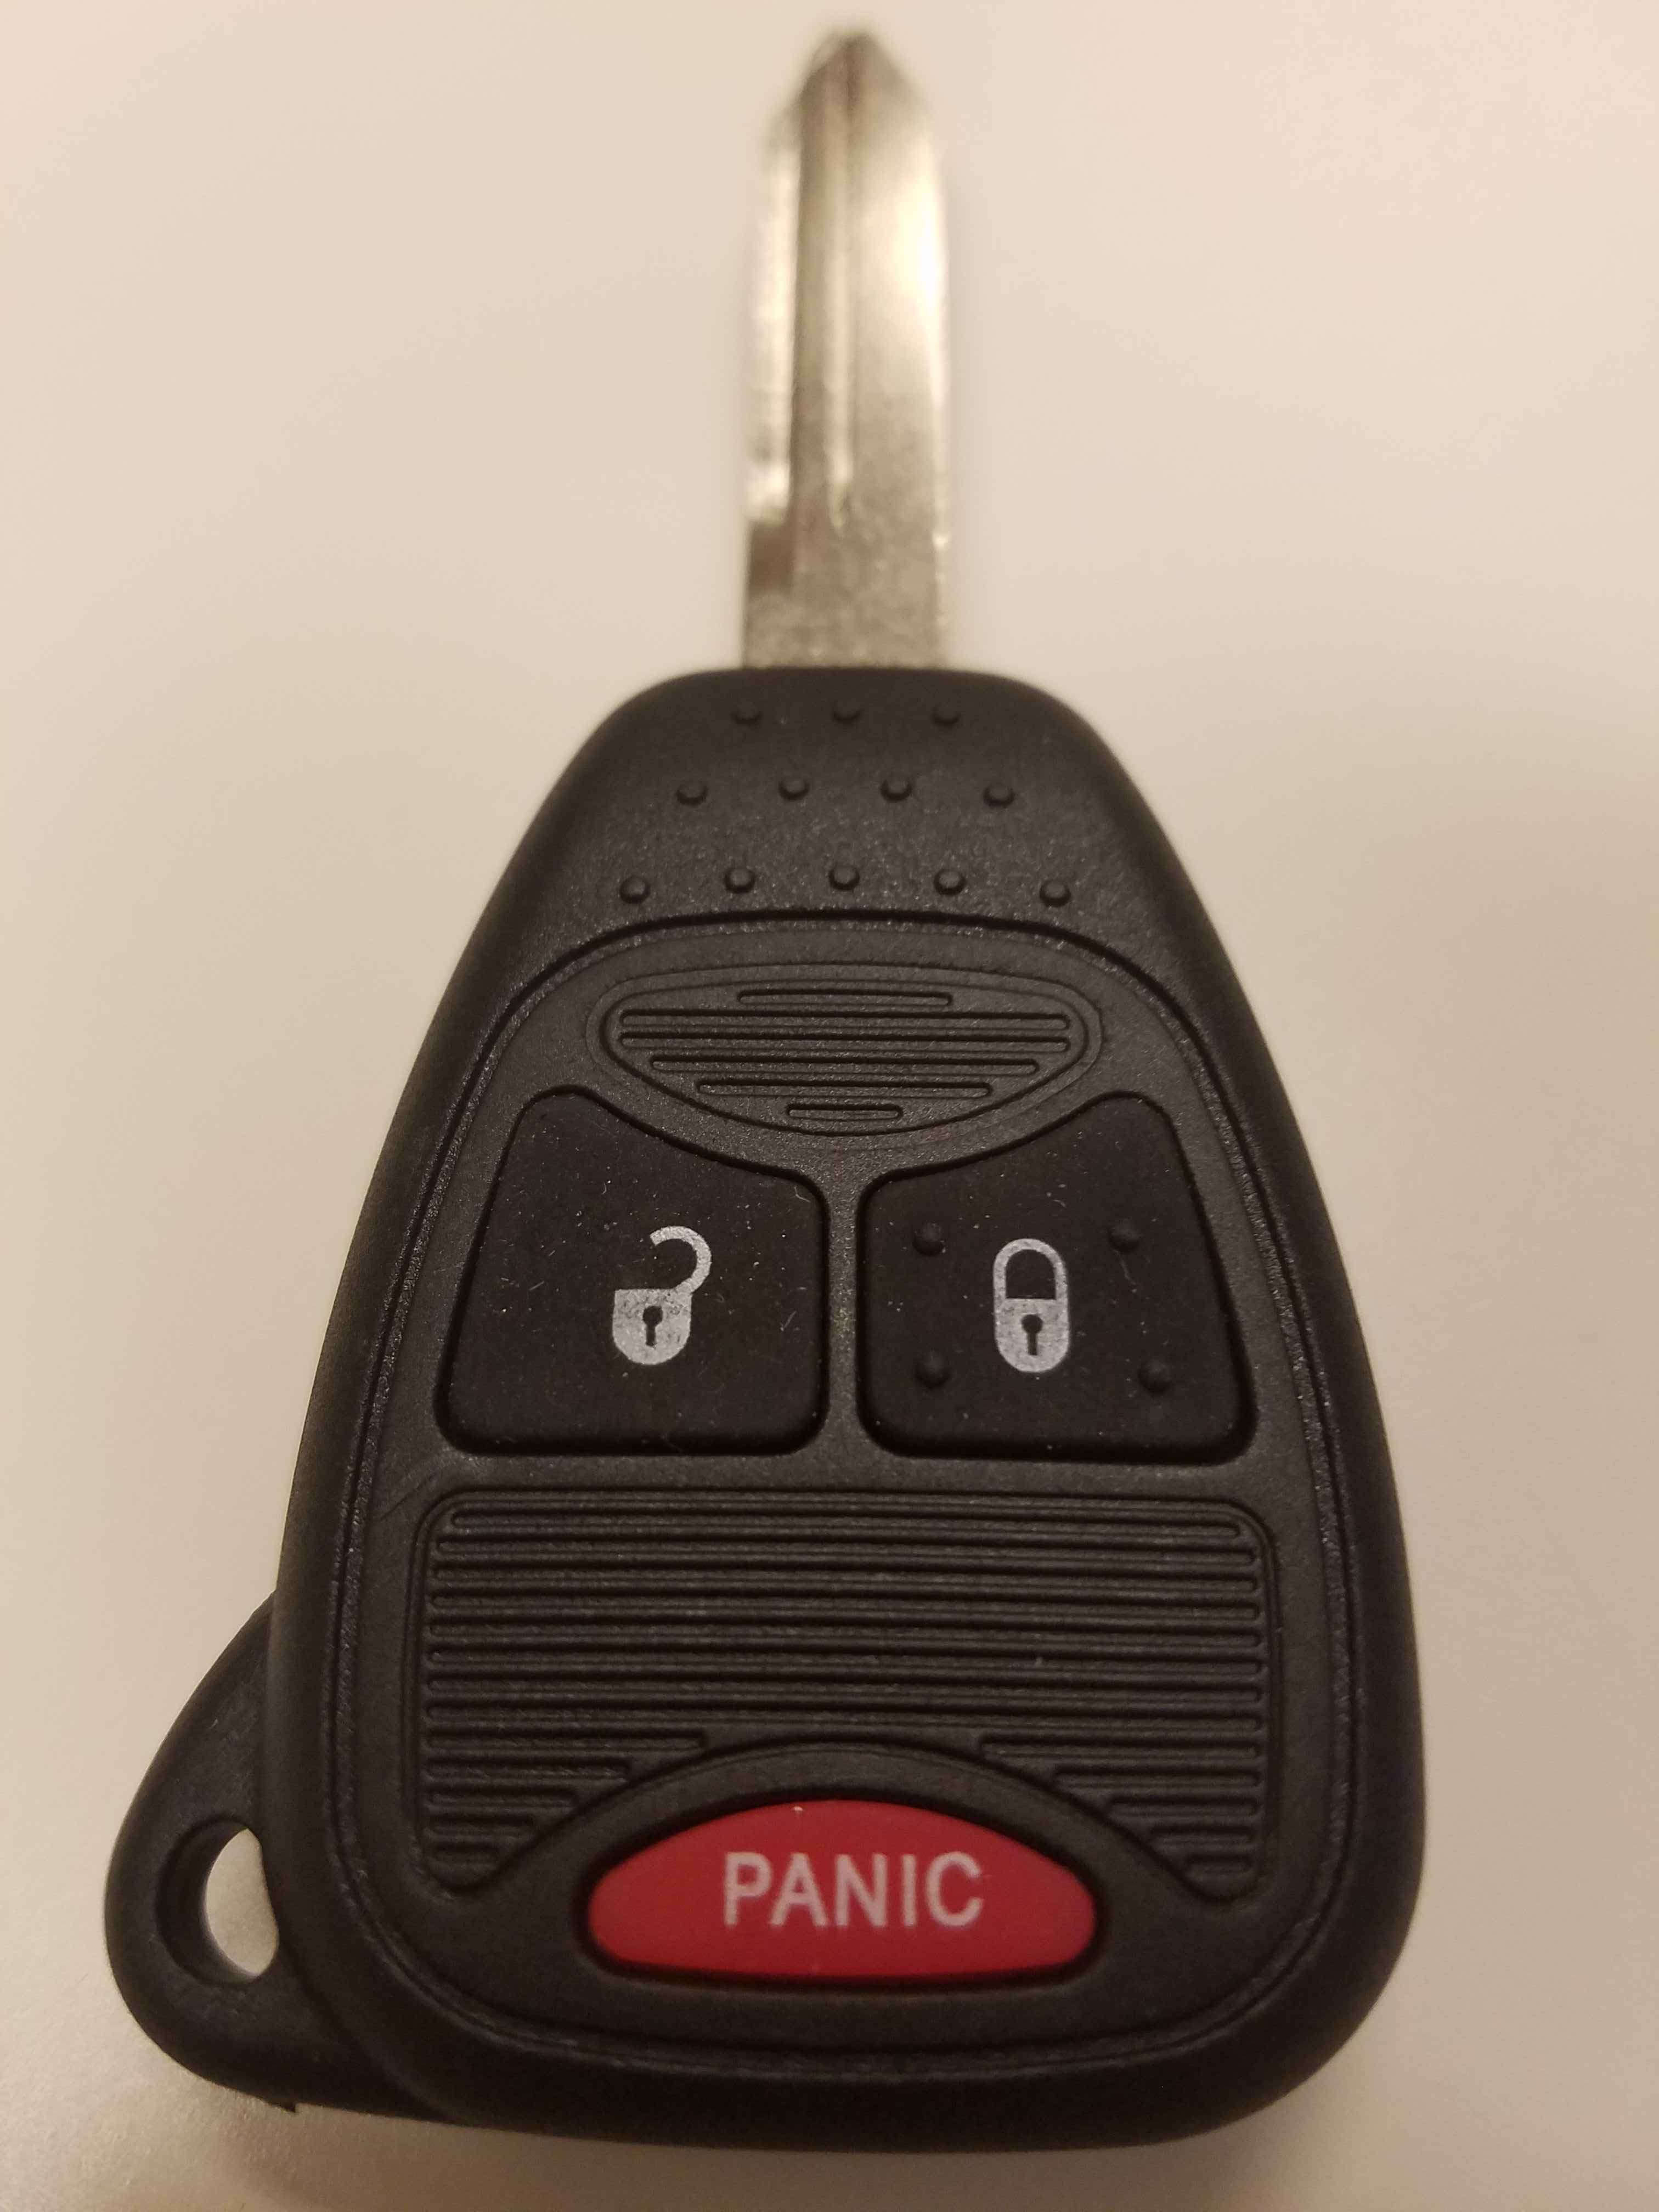 Jeep Wrangler Key replacement